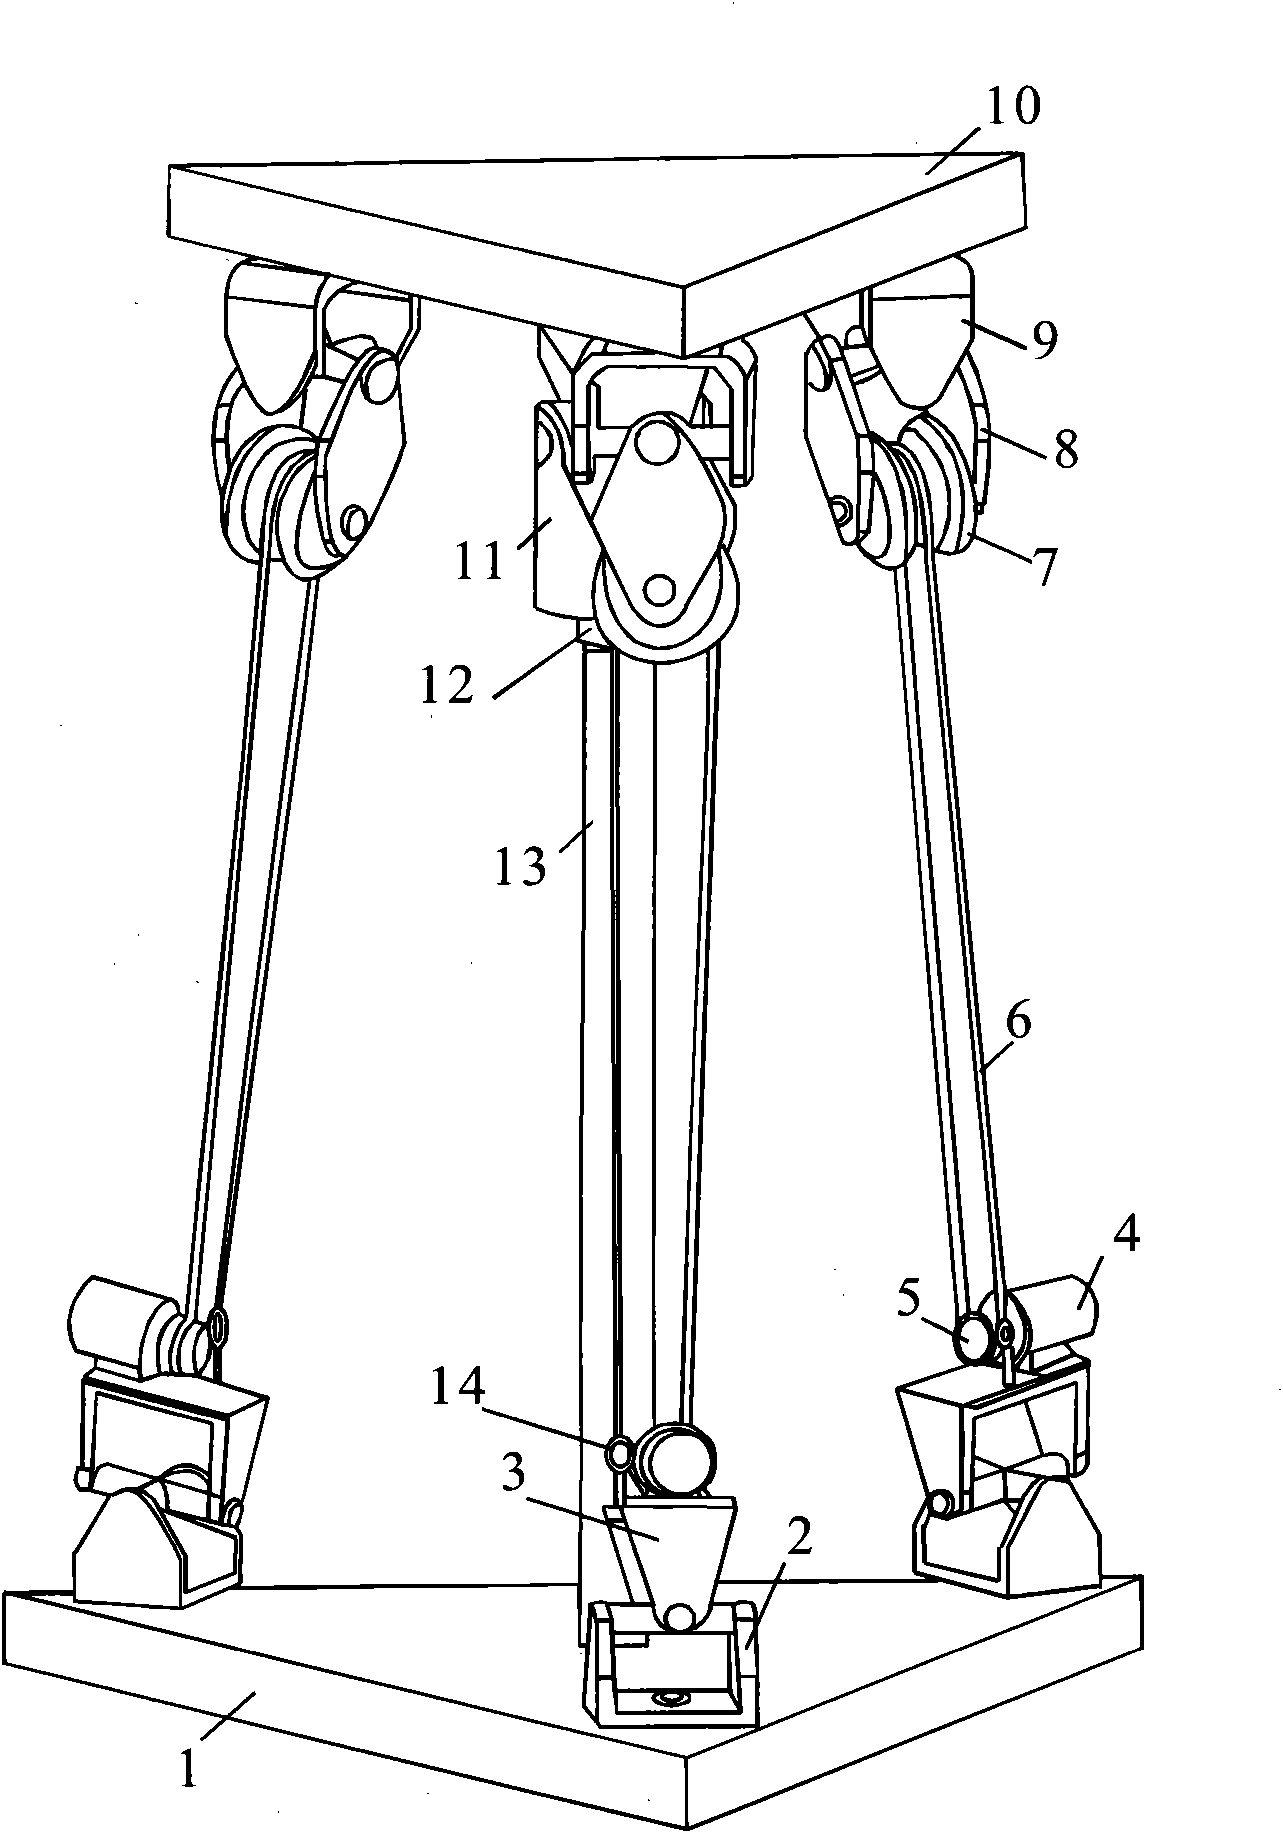 Three-rotational-freedom parallel mechanism driven by rope